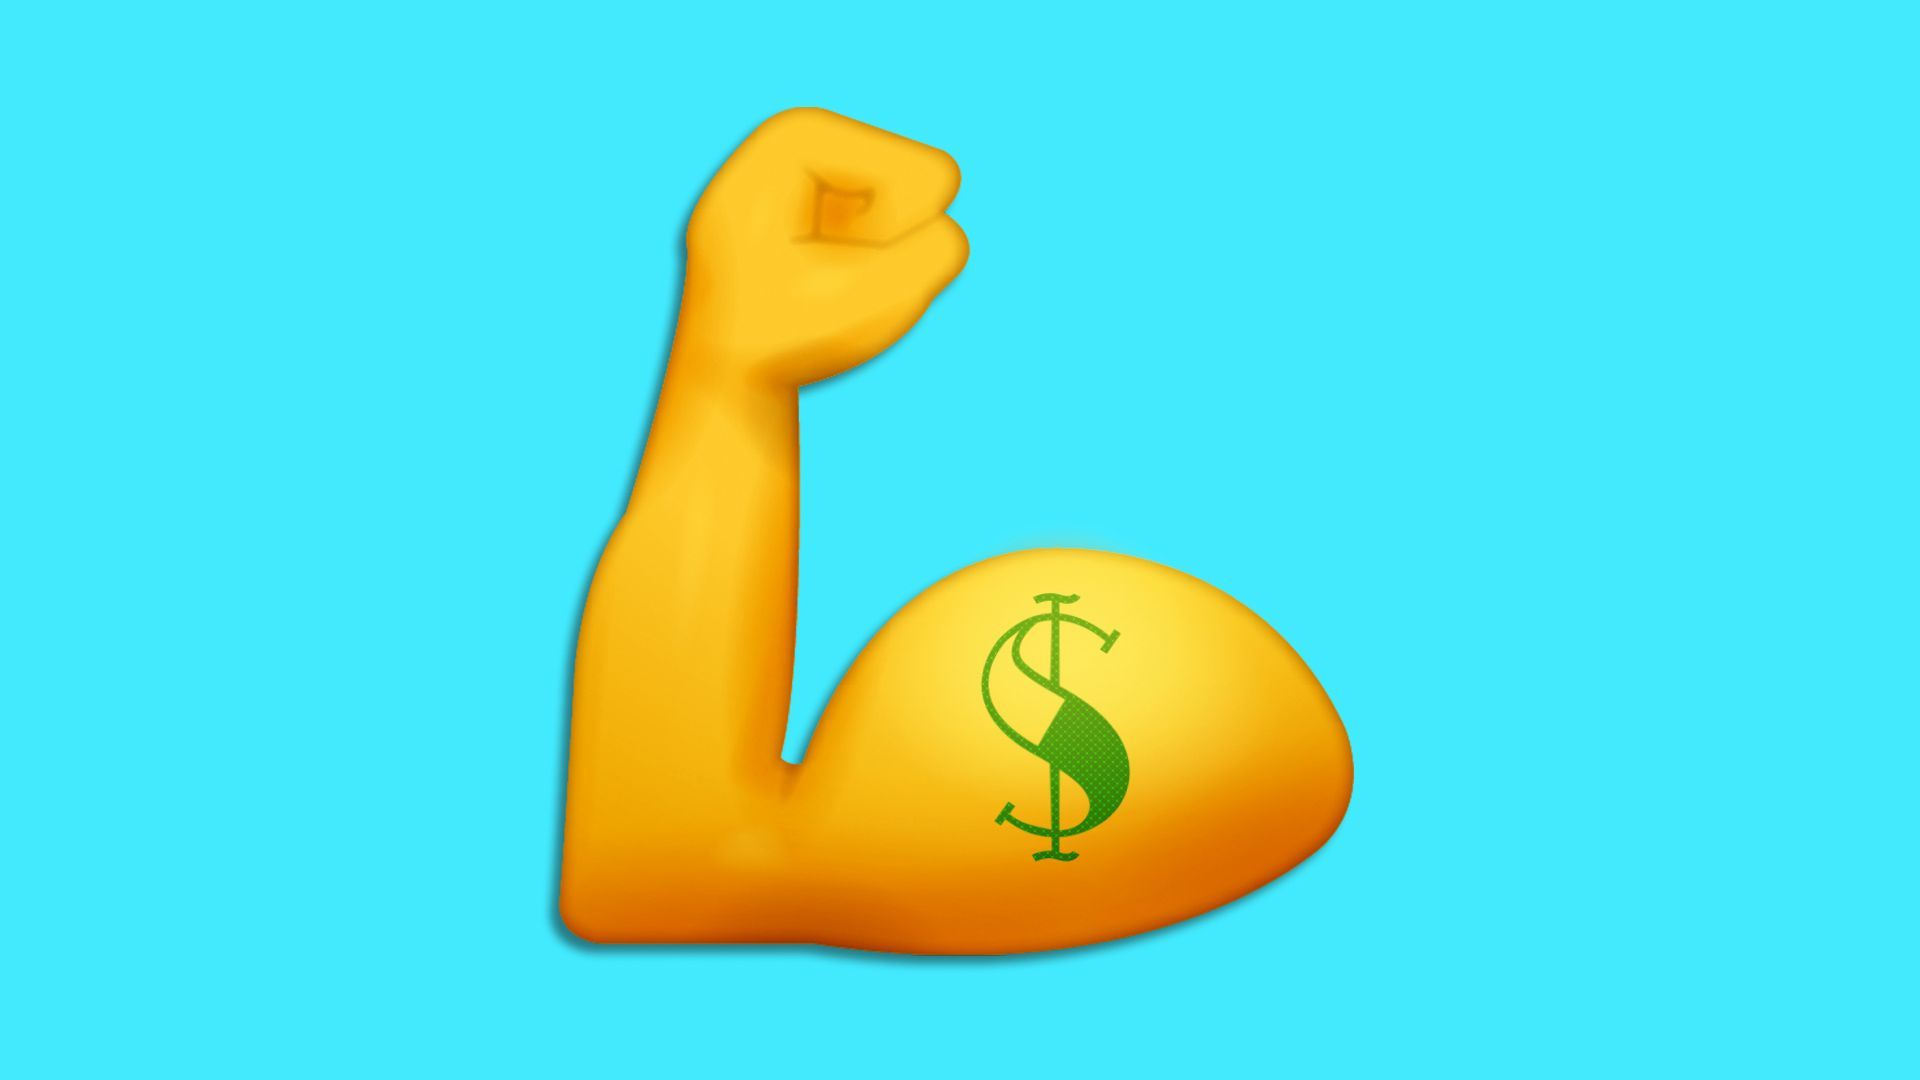 Illustration of the flex muscle emoji with a dollar sign tattoo.